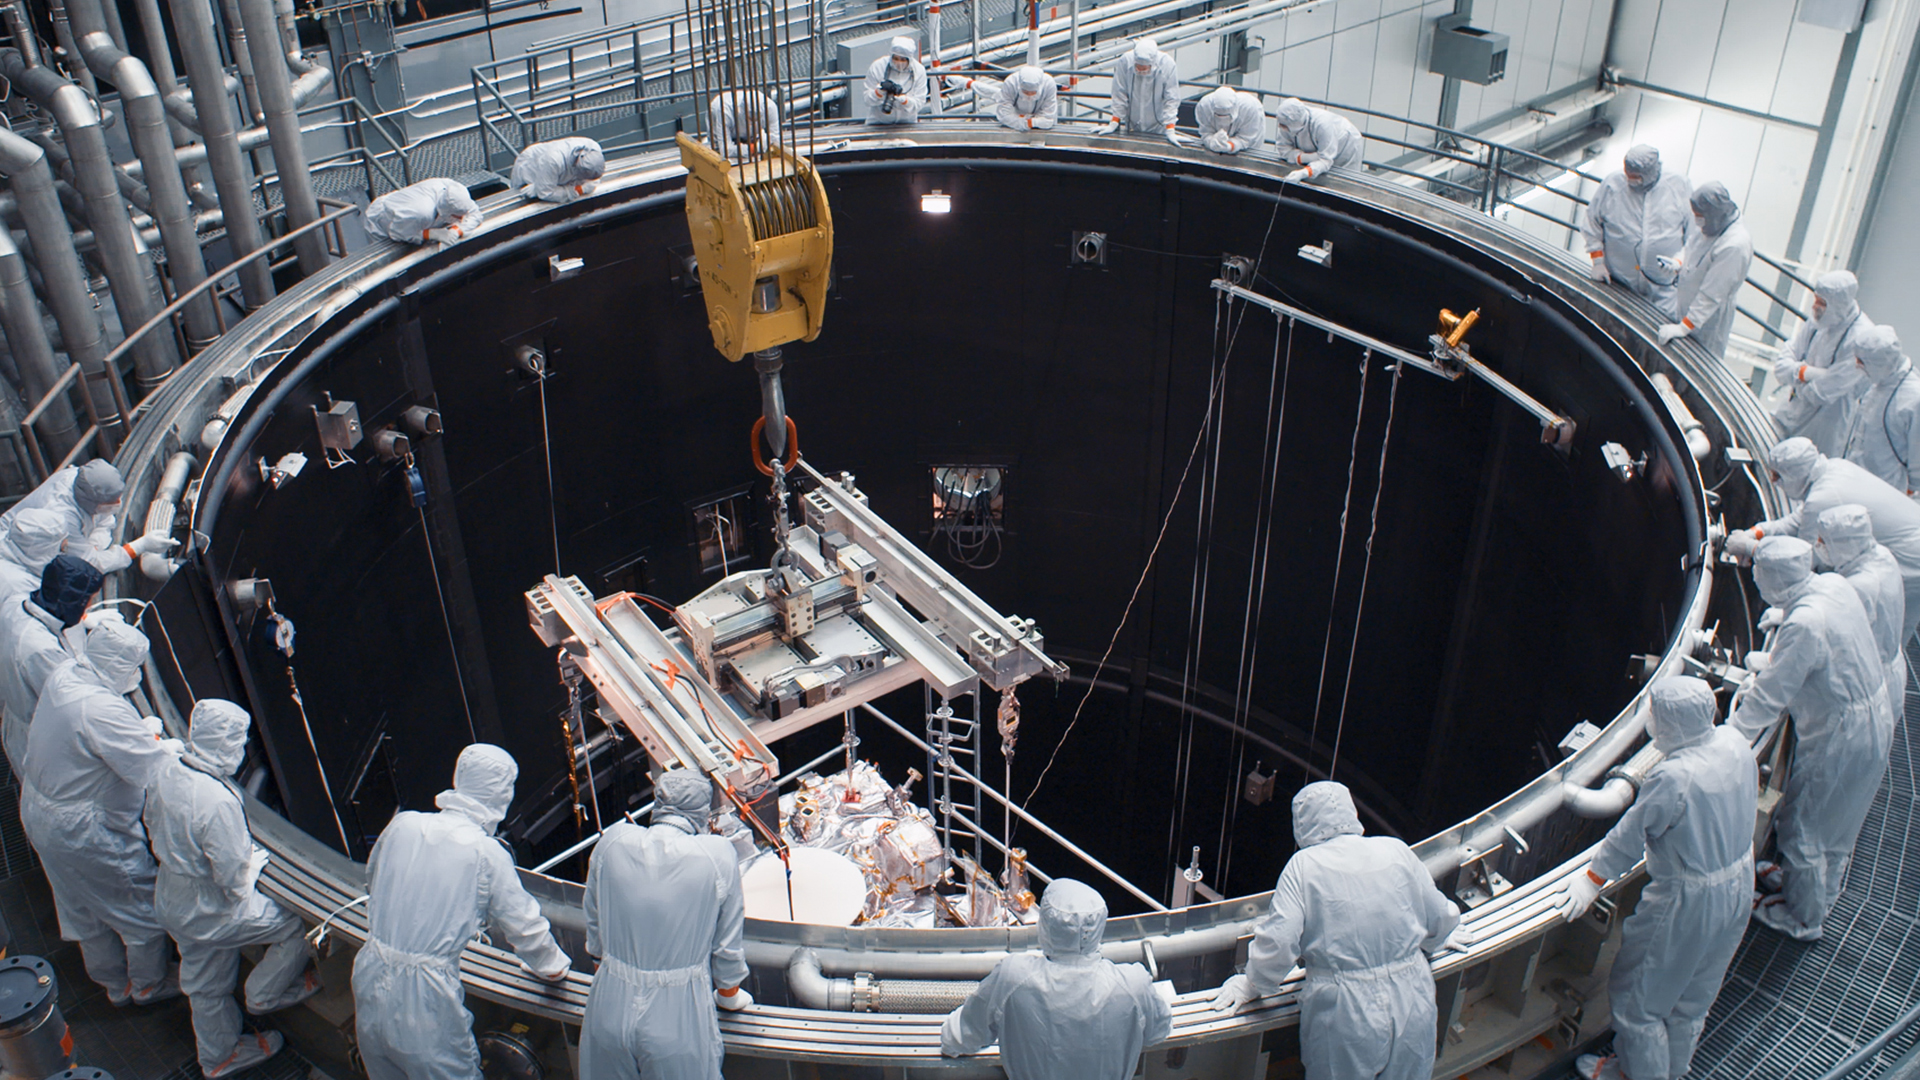 Technicians gather around Lockheed Martin’s thermal vacuum chamber to watch the OSIRIS-REx spacecraft enter one of its last phases of testing.